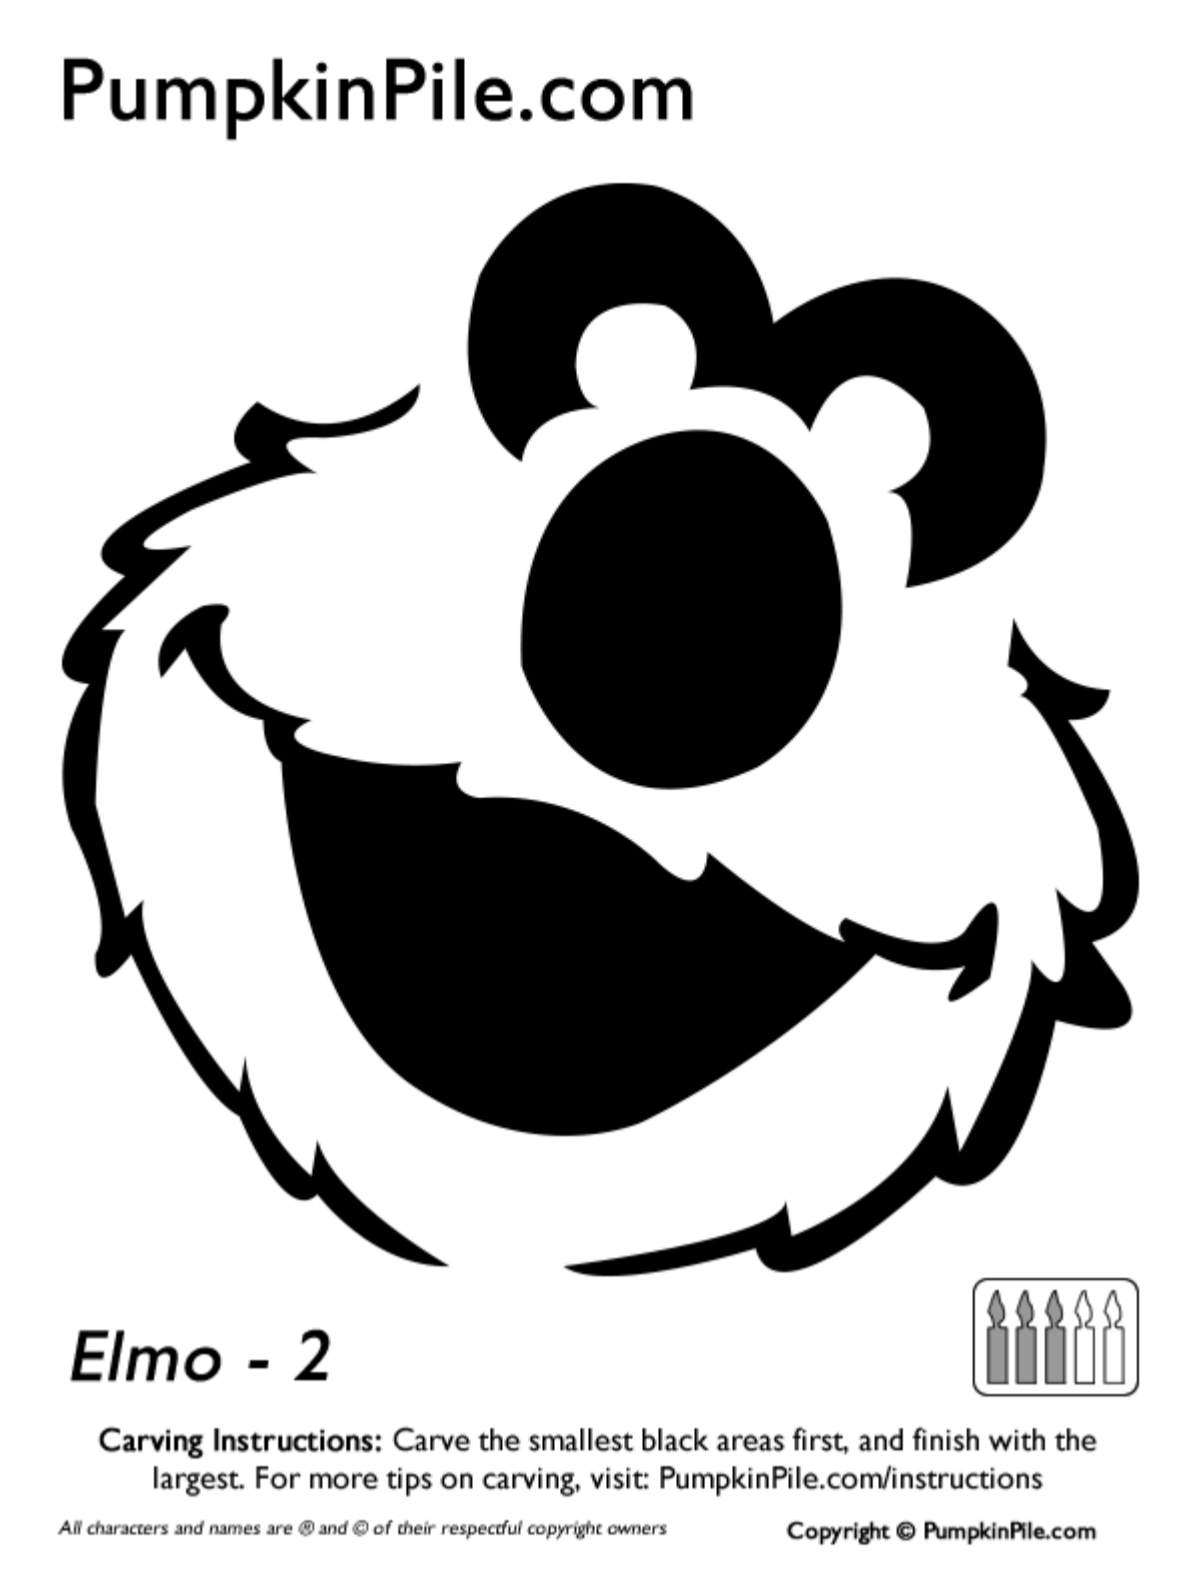 16 Easy To Use Pumpkin Carving Stencils To Help You Win Halloween for Free Elmo Pumpkin Pattern Printable